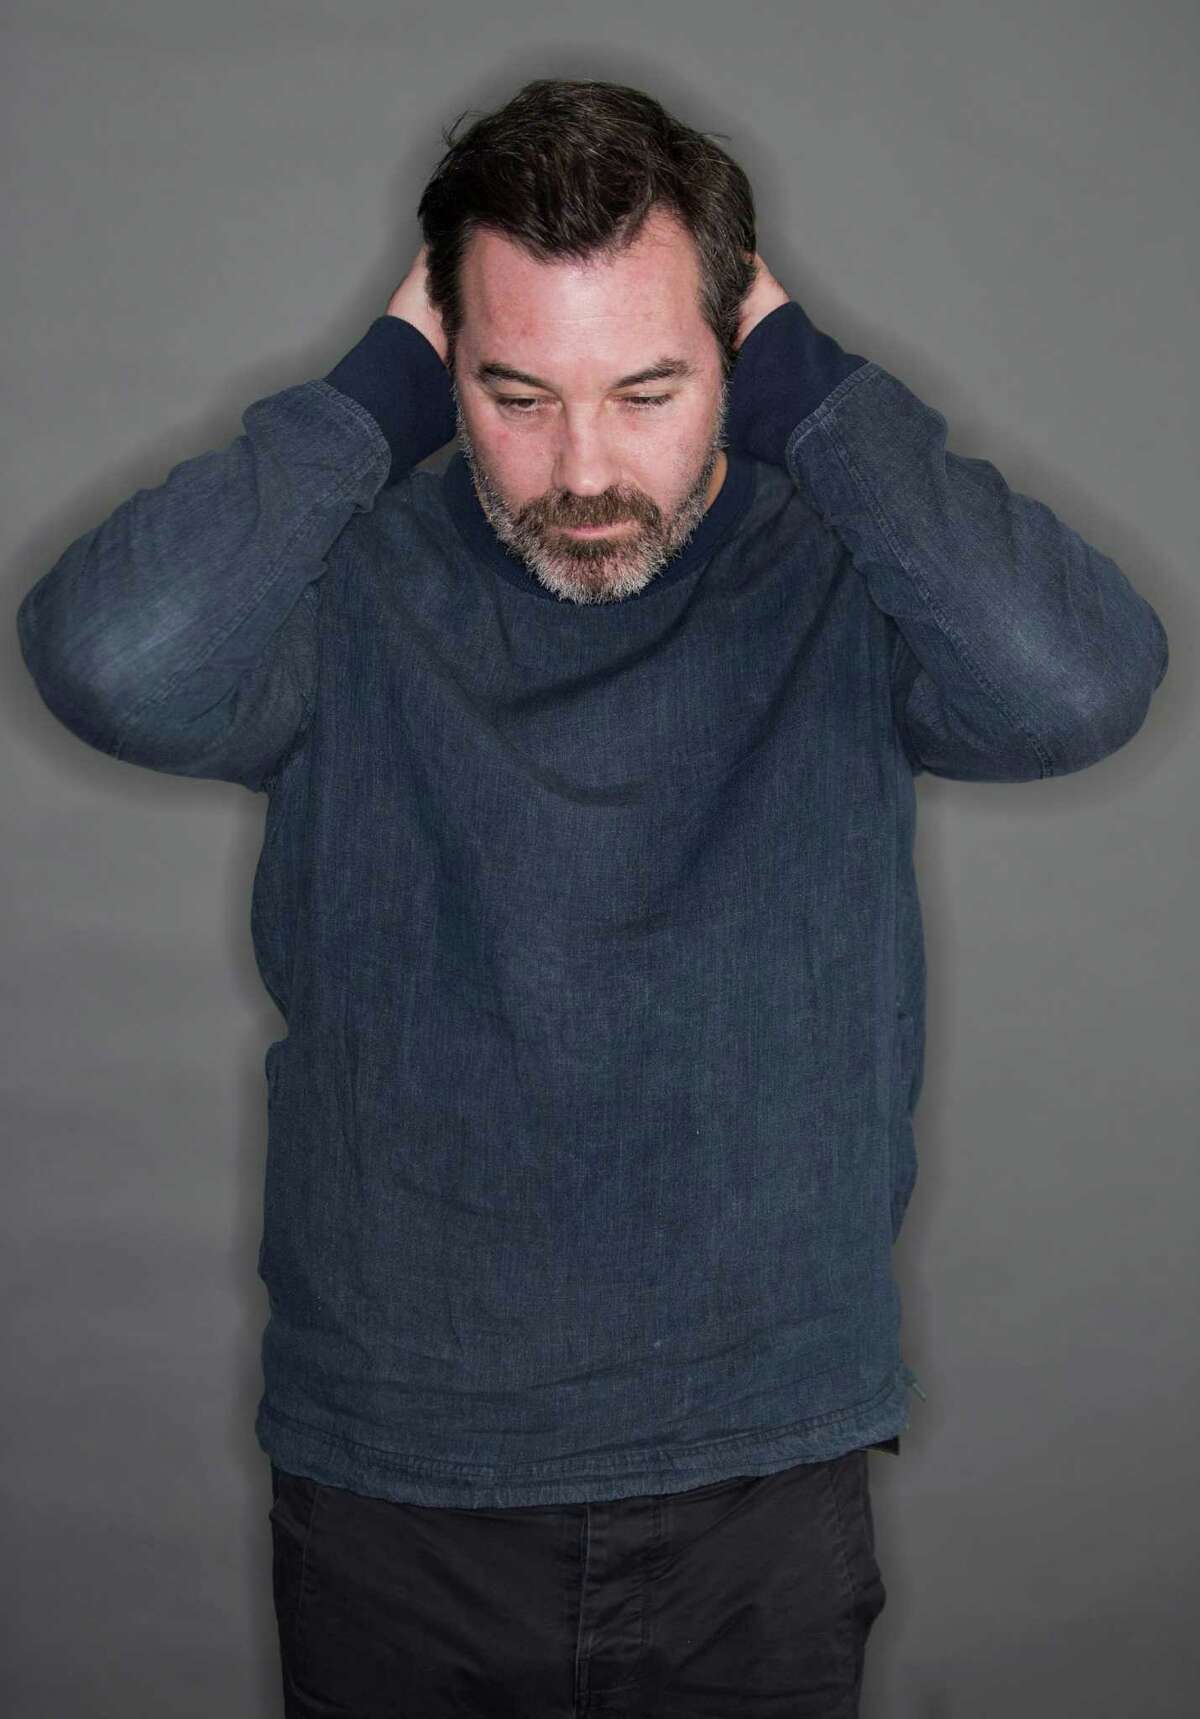 Duncan Sheik poses for a portrait on Thursday, March 24, 2016, in New York. Sheik is ready to let Broadway audiences hear how he turned the provocative 1991 novel, "American Psycho," about a psychopath into one of the season's bravest pieces of musical theater. It opens April 20. (Photo by Brian Ach/Invision/AP ORG XMIT: NYBA104